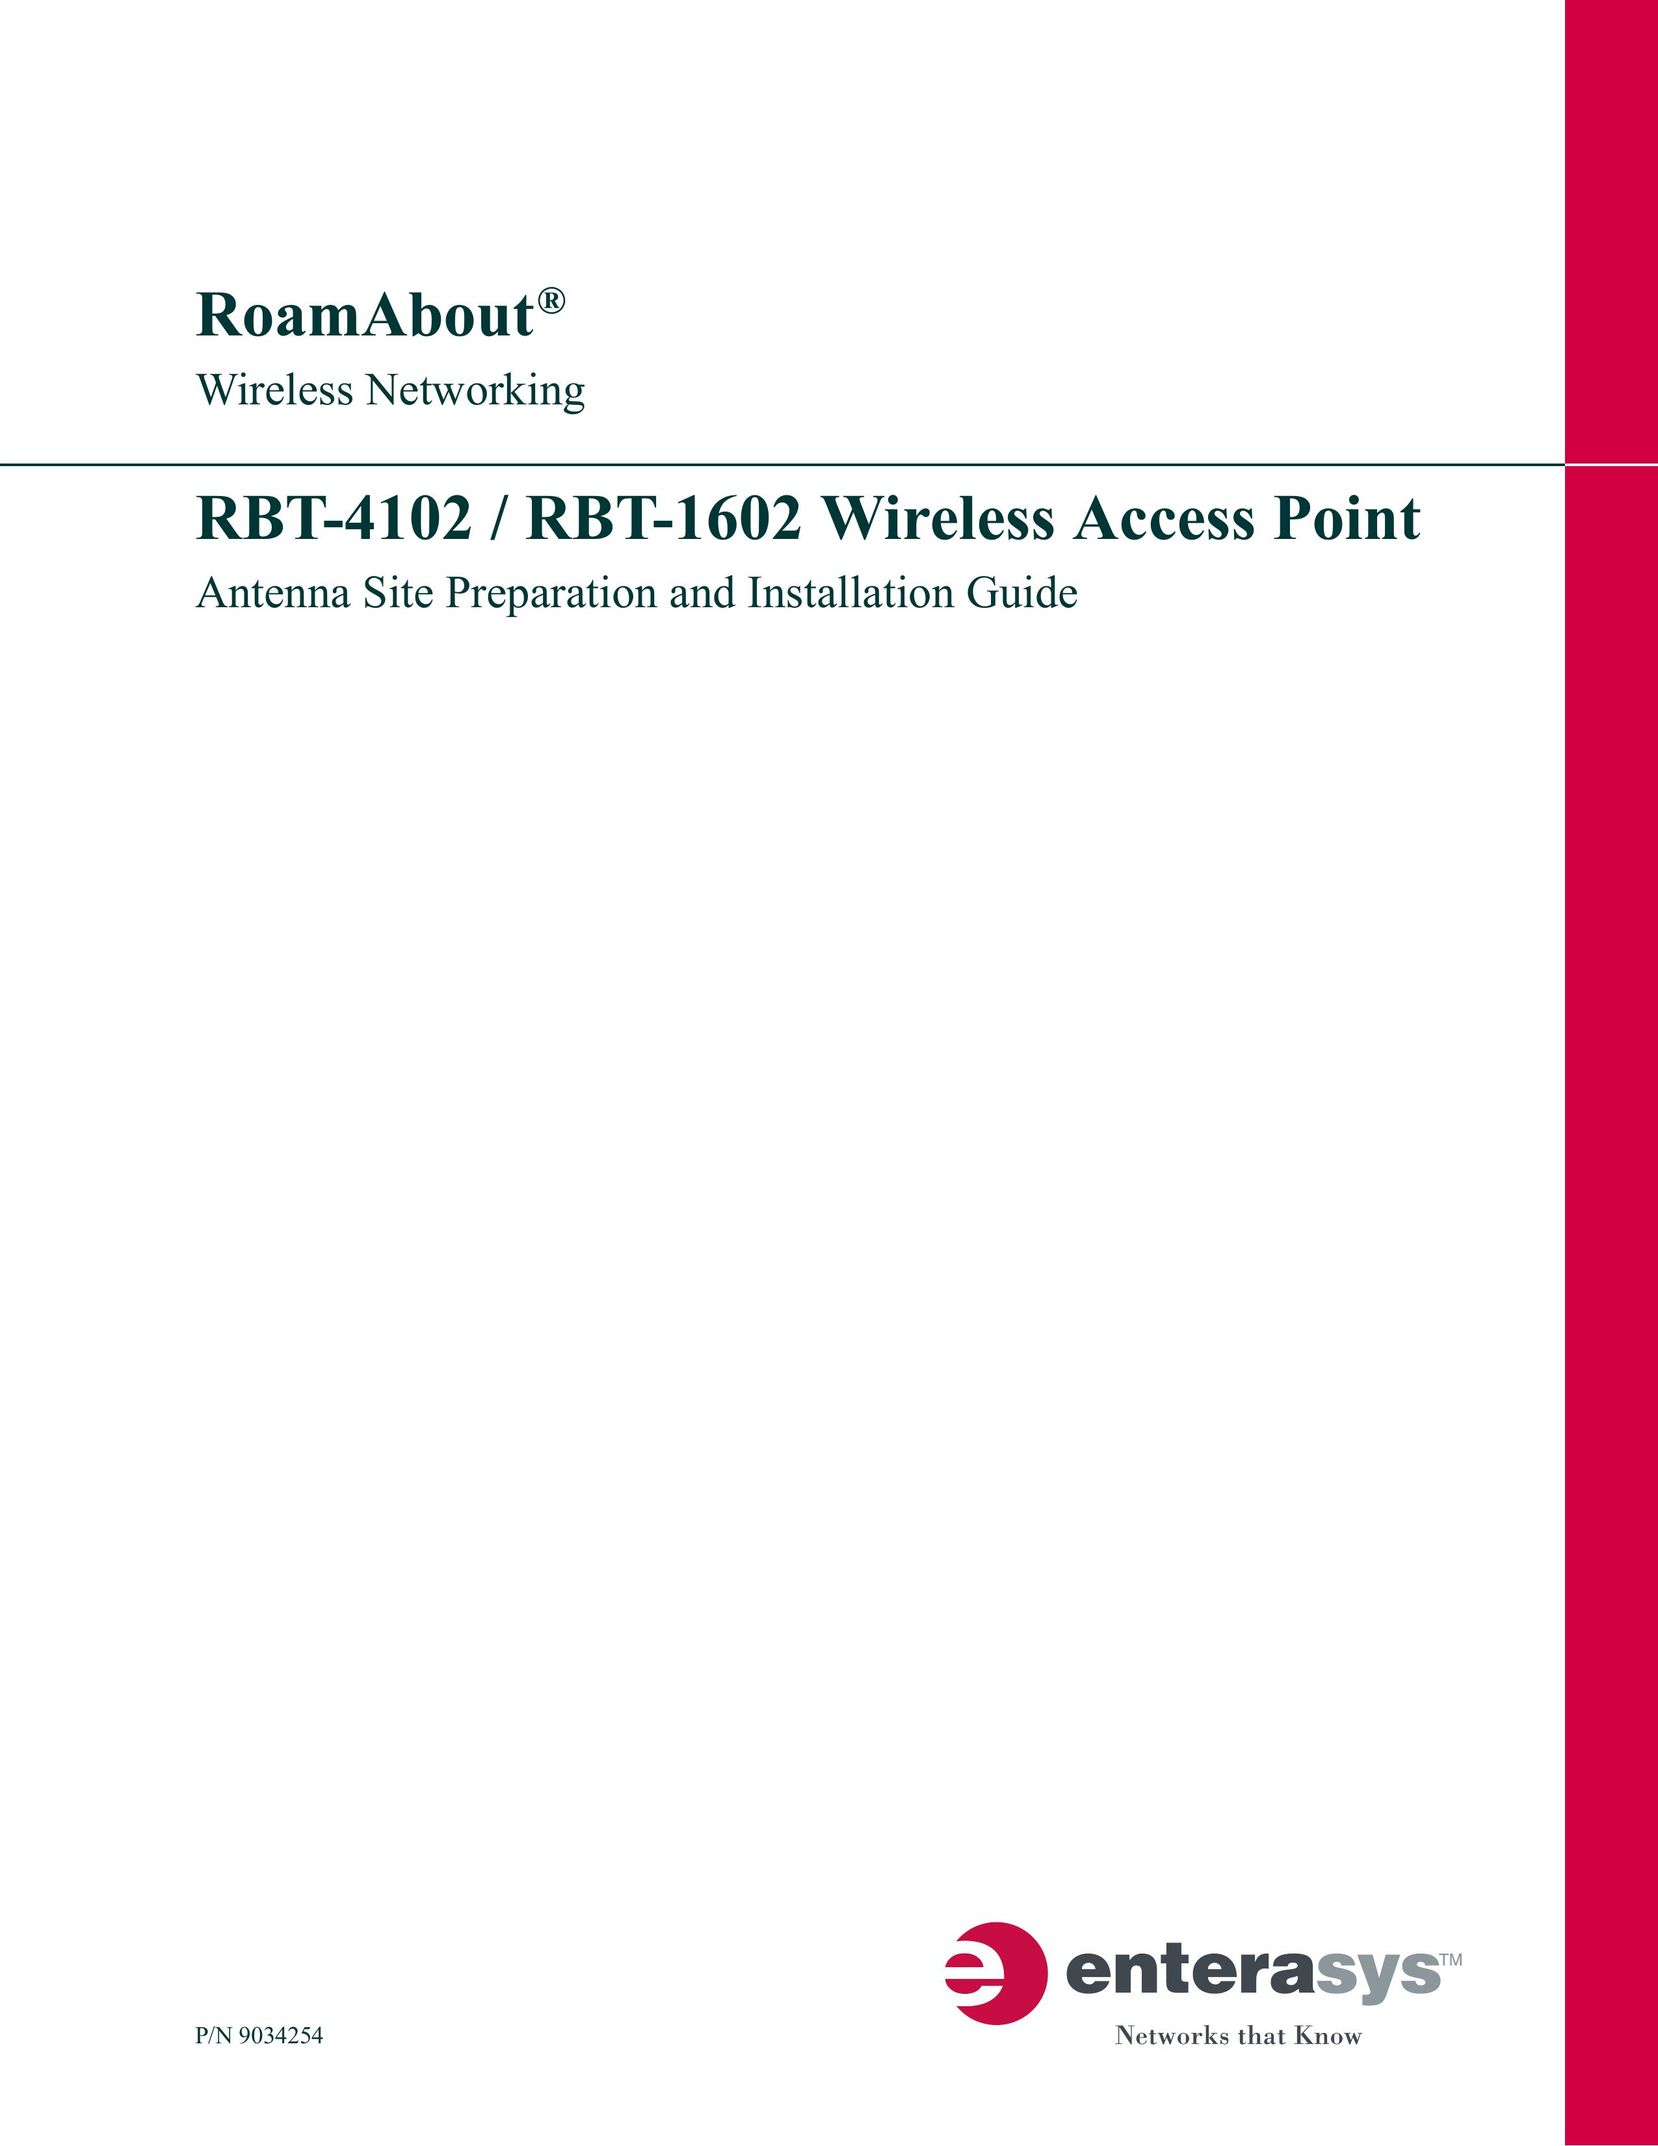 Enterasys Networks RBT-1602 Network Router User Manual